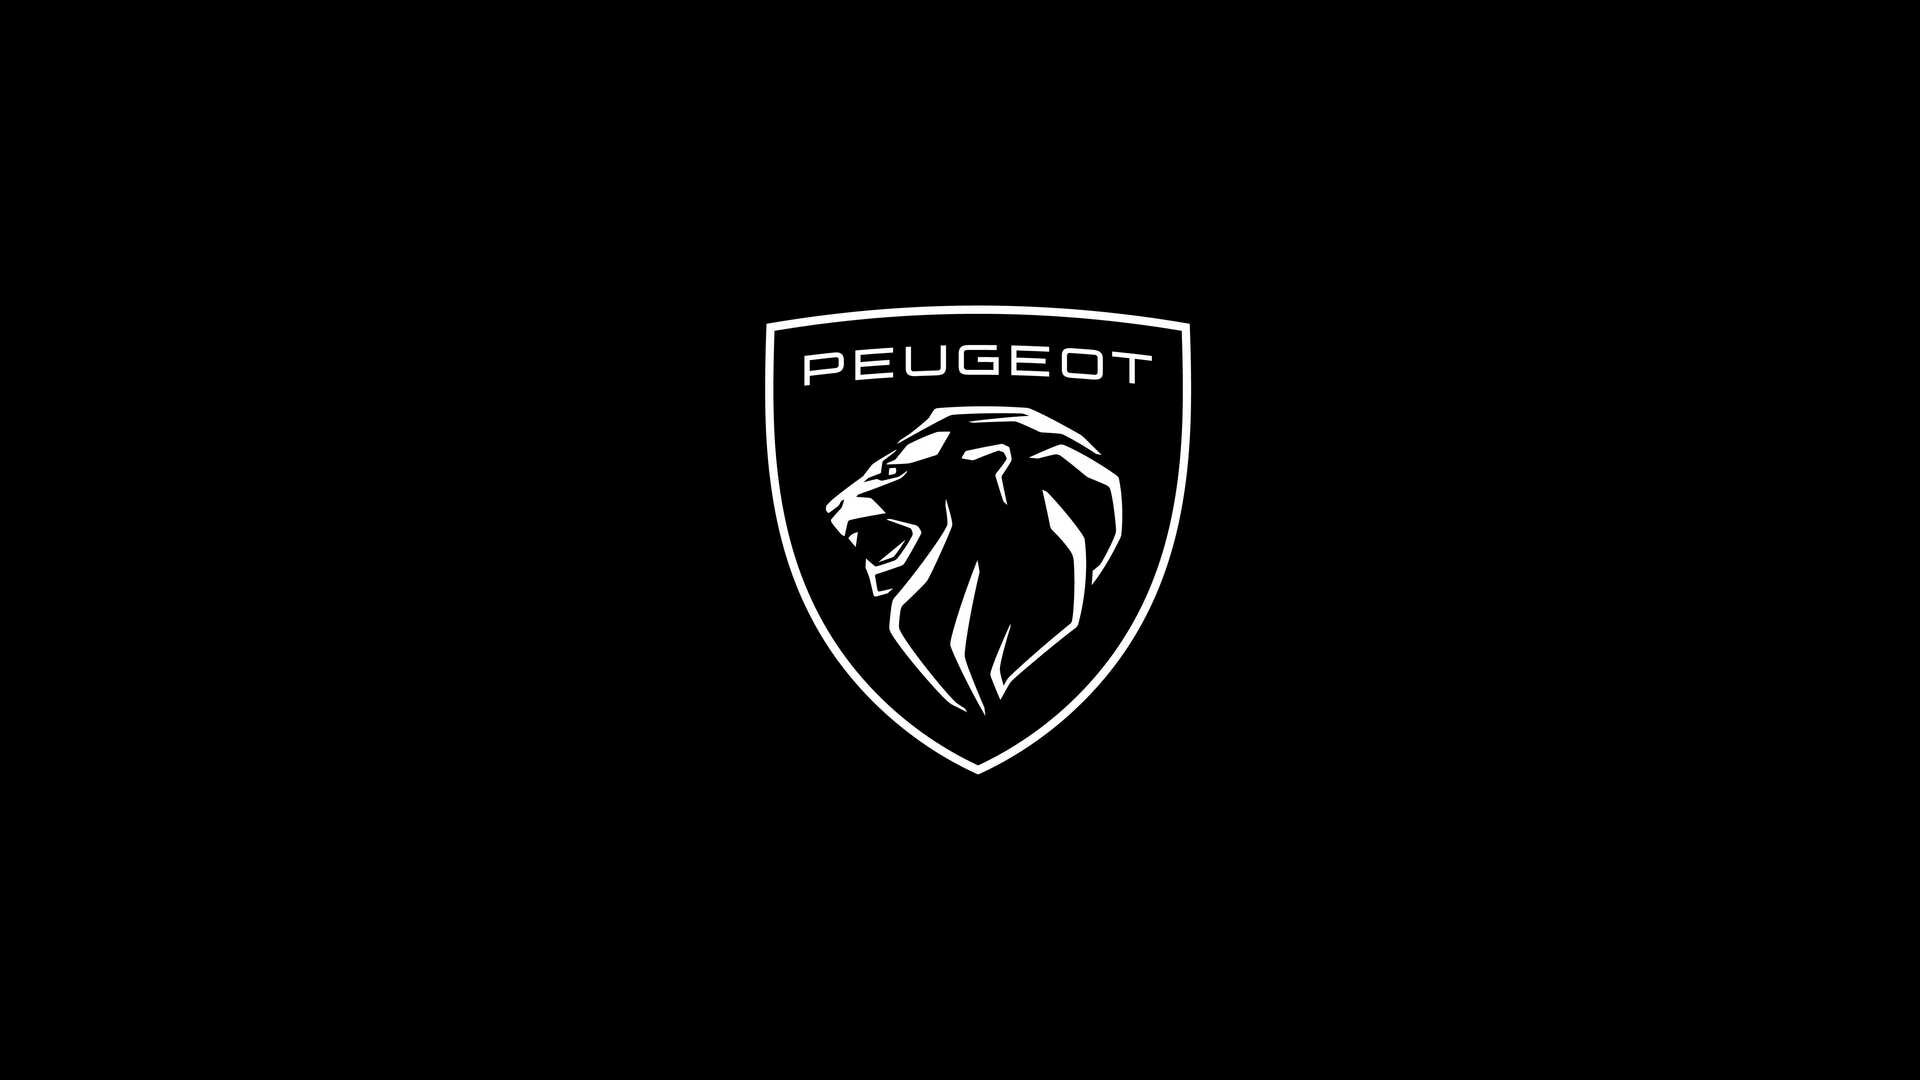 Peugeot: Produced model 403, one cabriolet/convertible driven by TV detective Columbo. 1920x1080 Full HD Background.